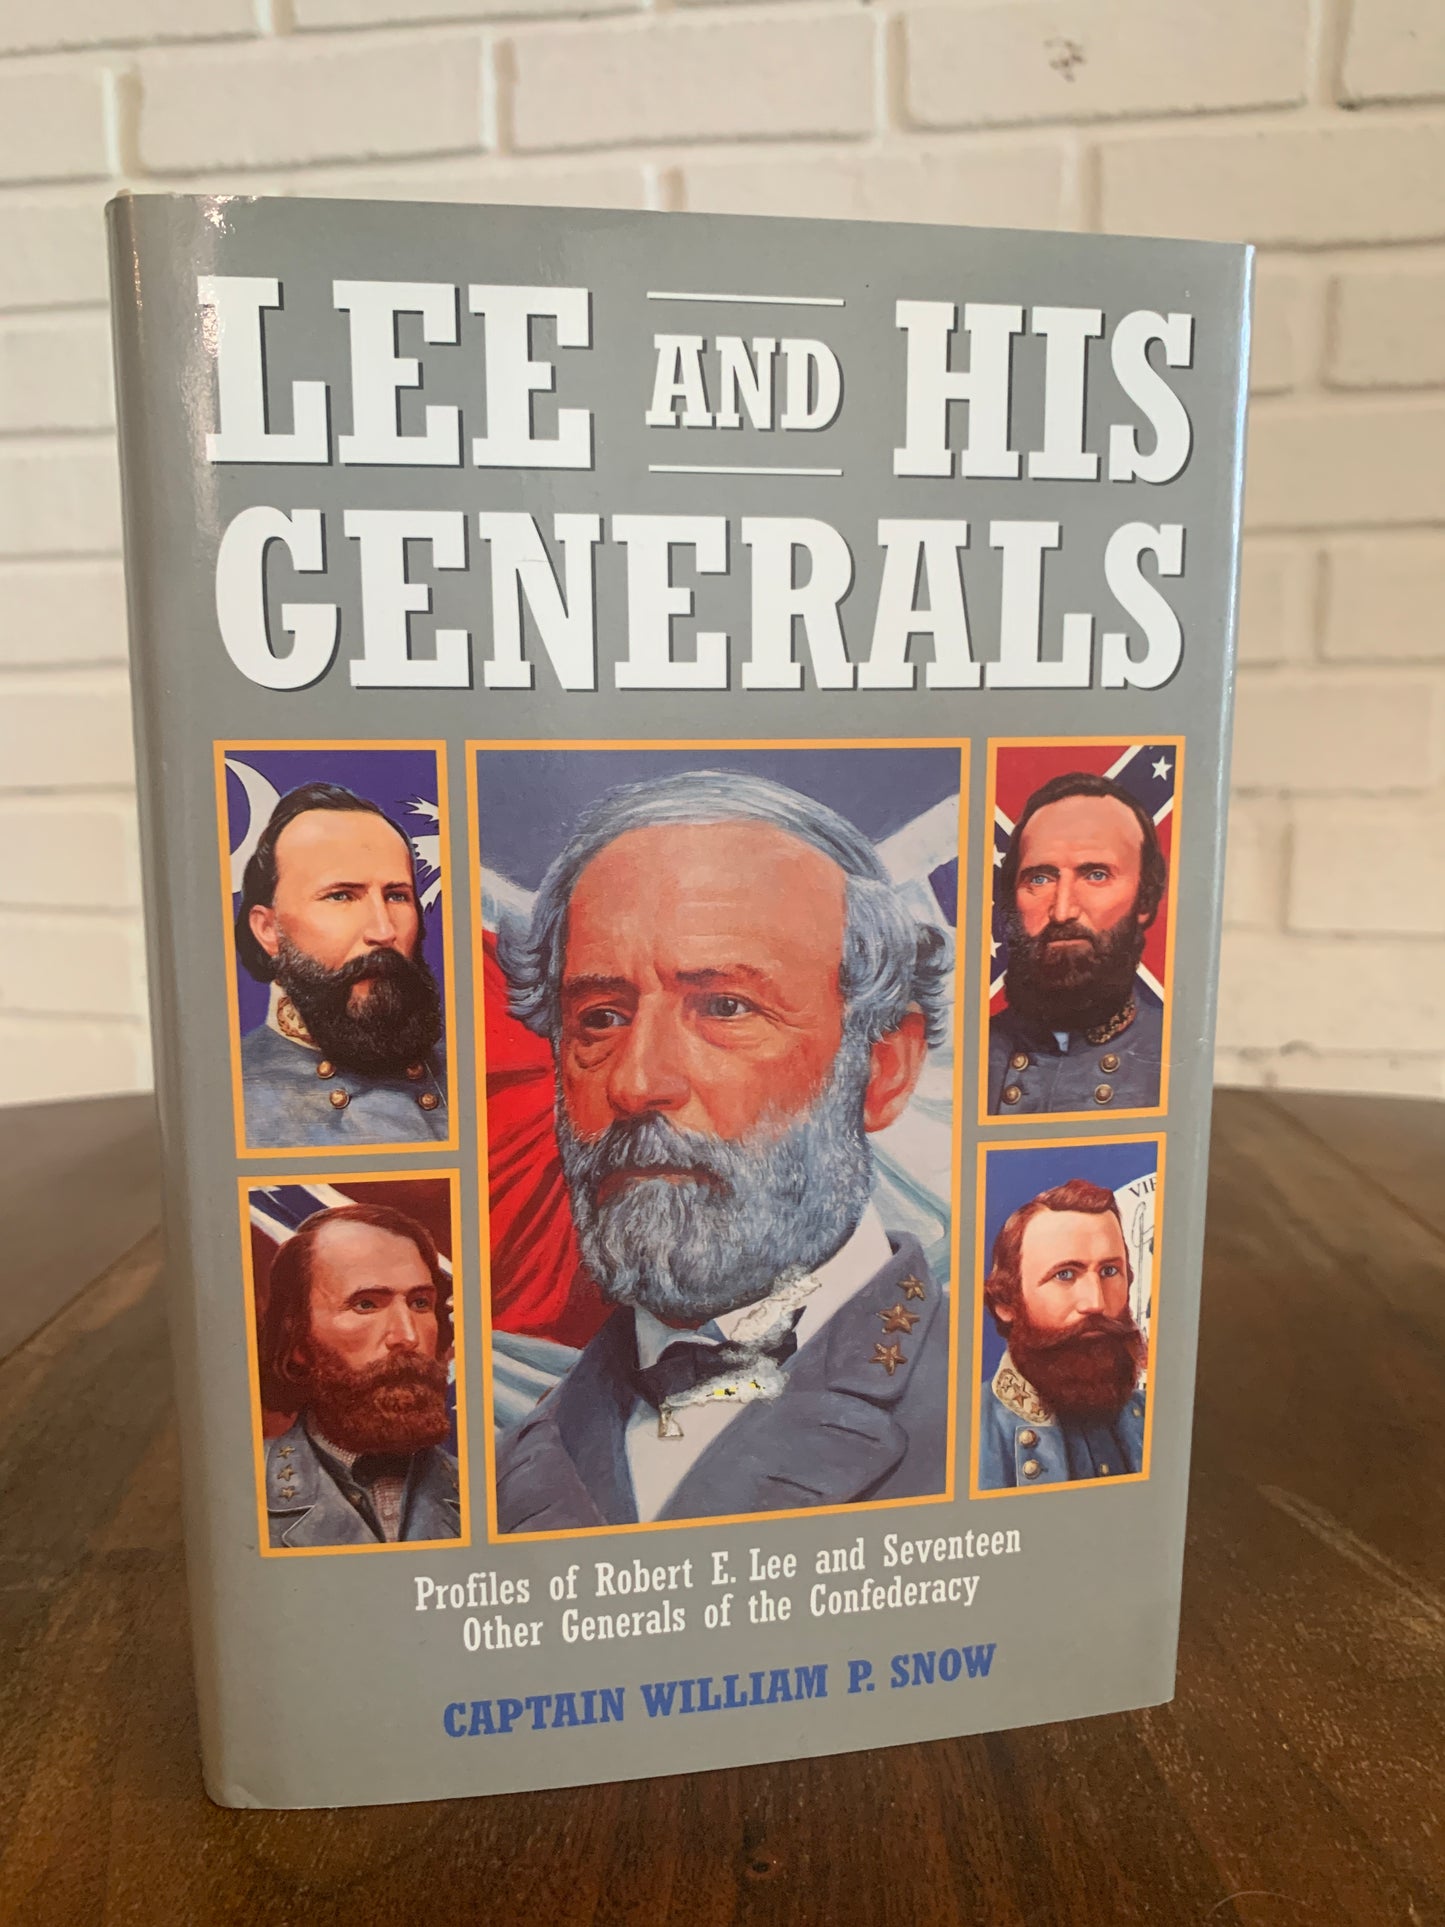 Lee and His Generals by Captain William P. Snow 1996 Hardcover